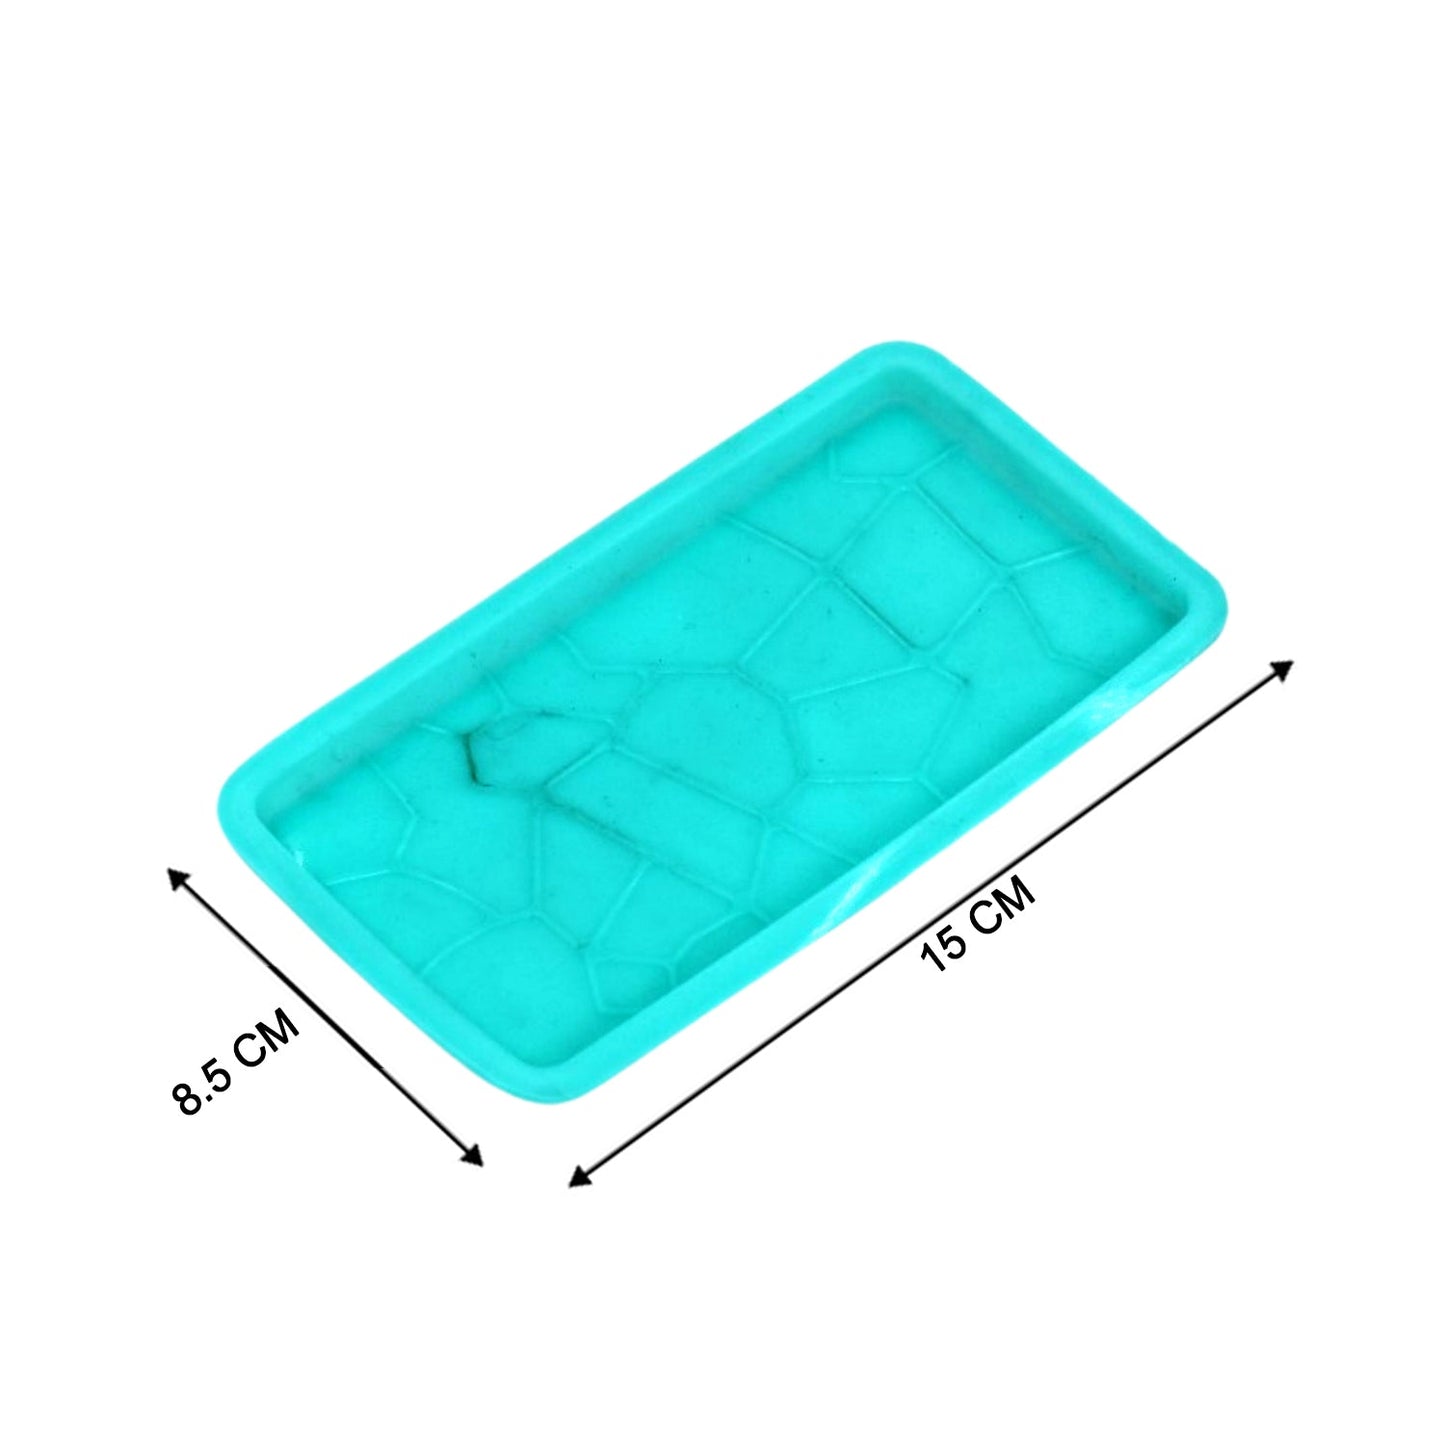 4888 Flexible Silicone Mold Candy Chocolate Cake Jelly Mould - SWASTIK CREATIONS The Trend Point SWASTIK CREATIONS The Trend Point